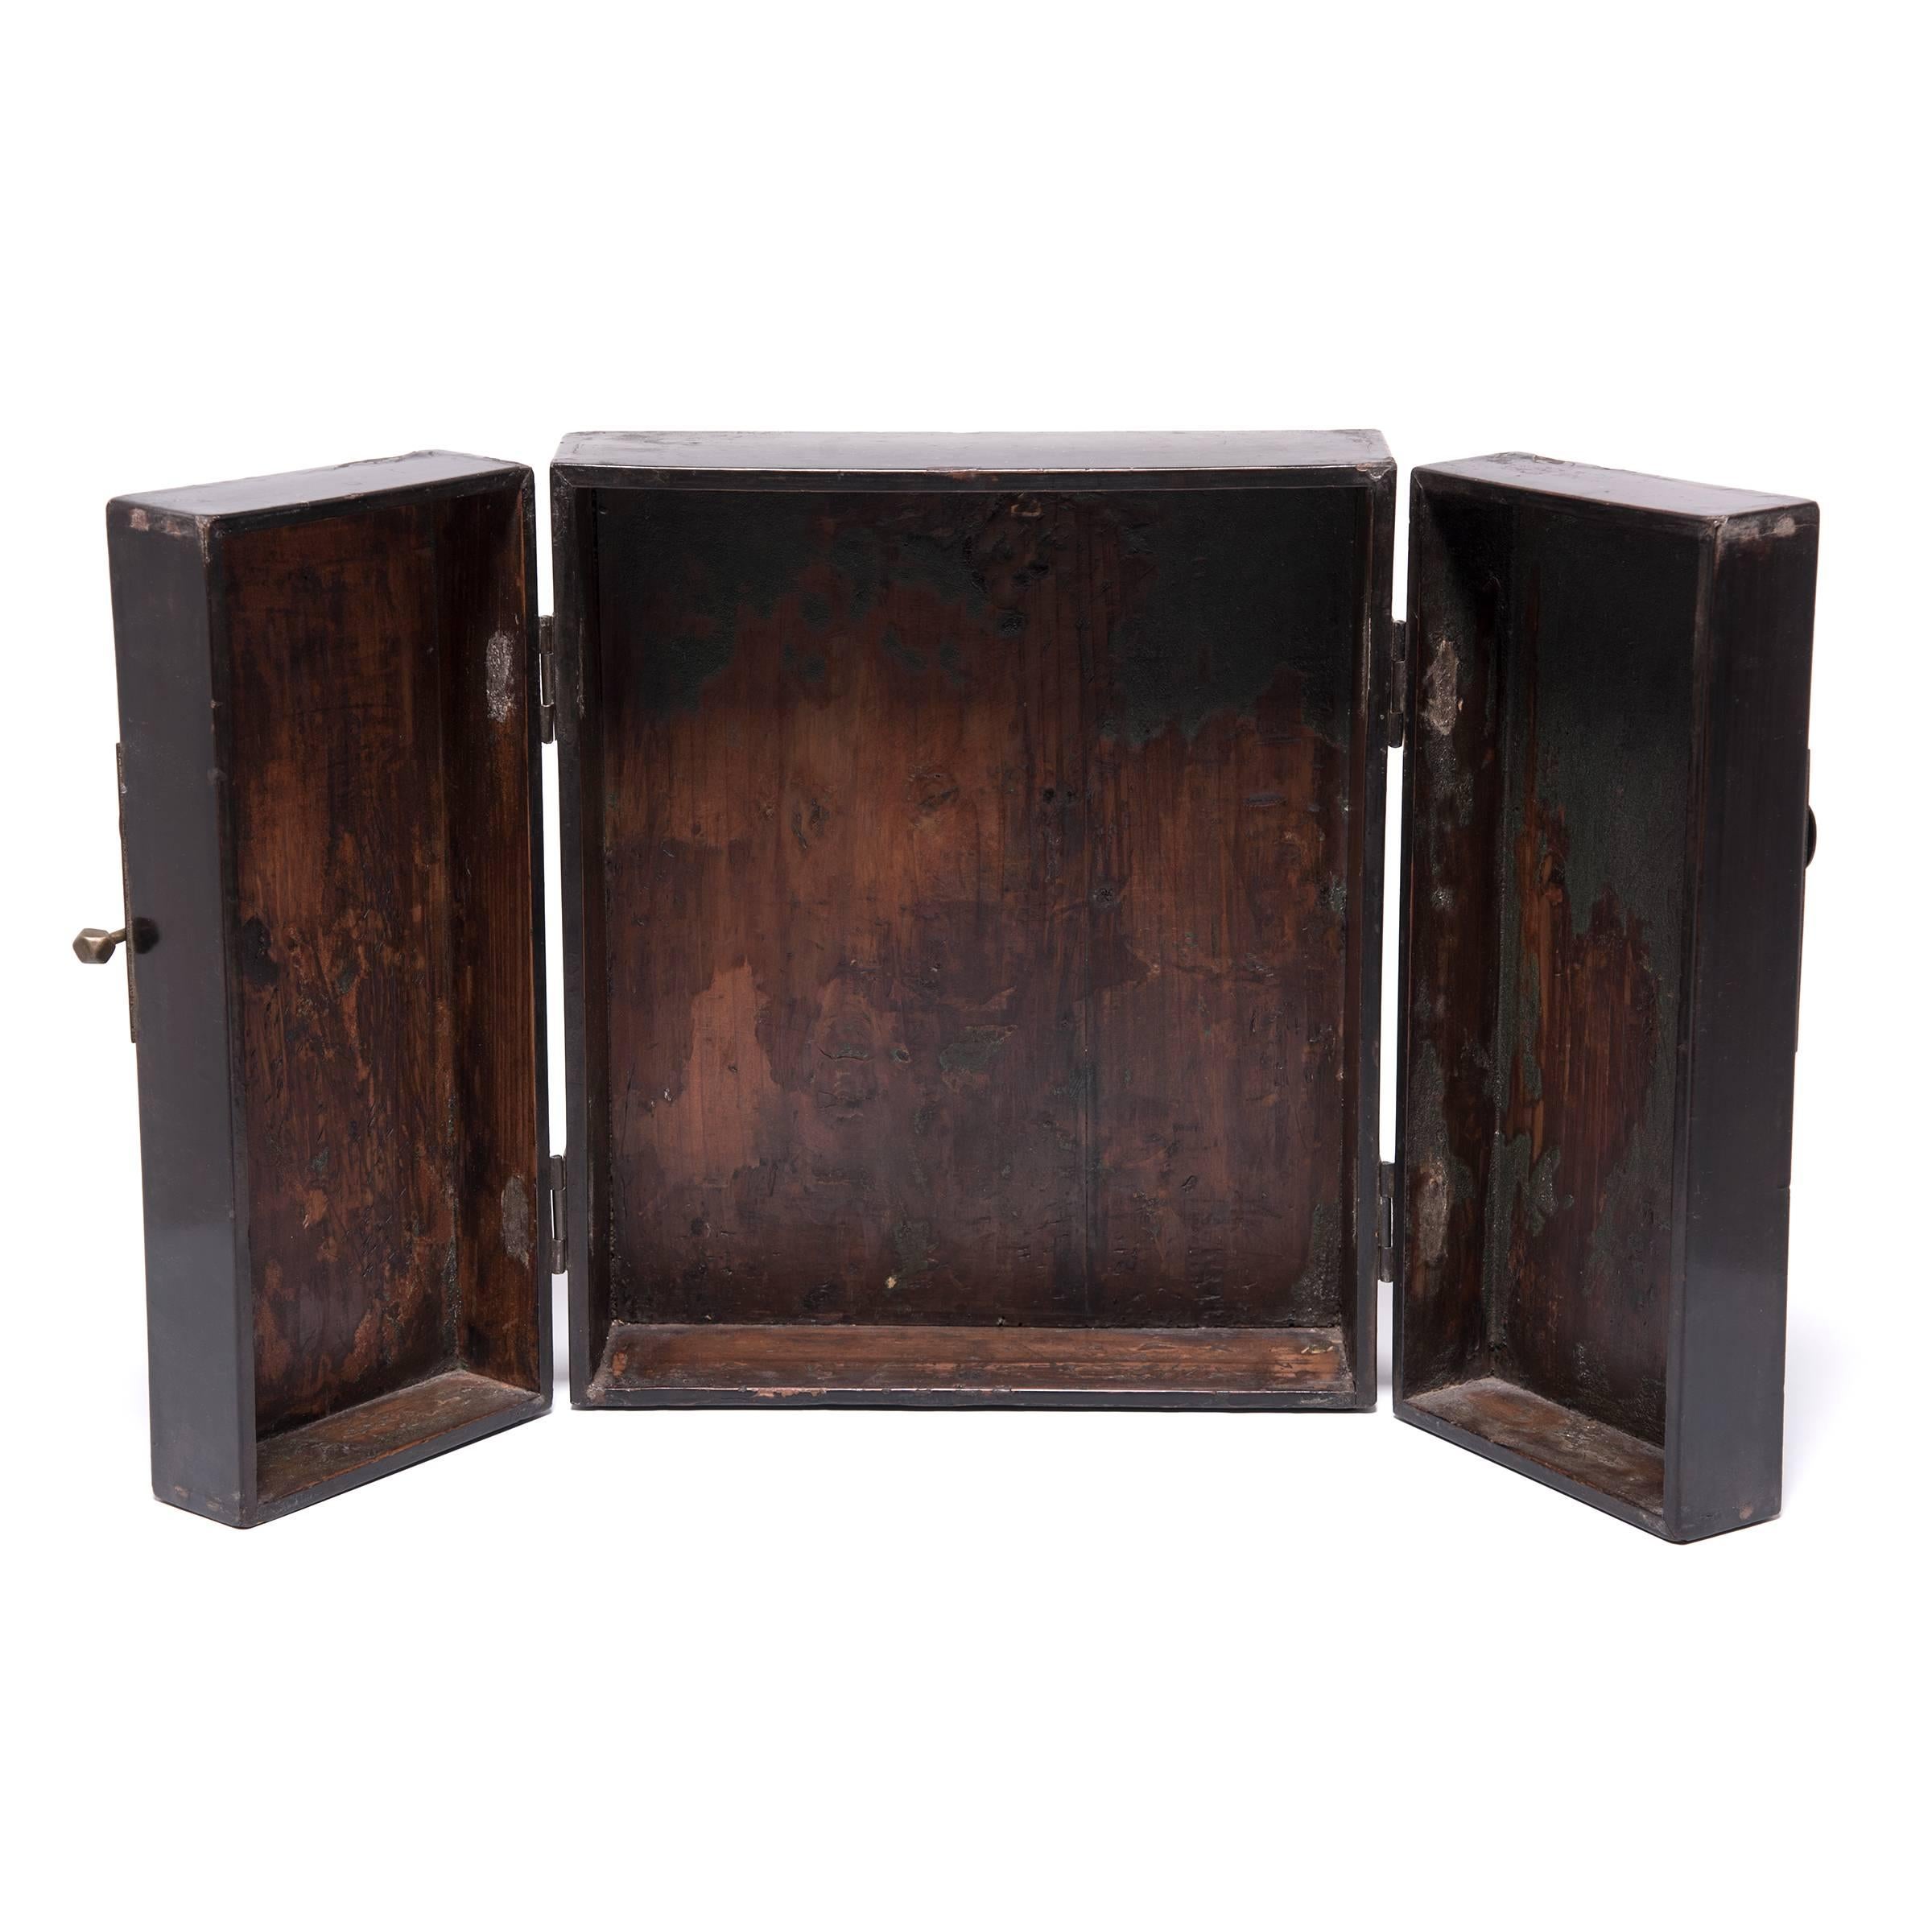 Made of Chinese northern elm, this altar cabinet once contained the essentials for ancestor rituals. Although darkened with age, the cabinet’s two doors still bear the dynamic brushwork and vivid color of its painted floral decoration. Its